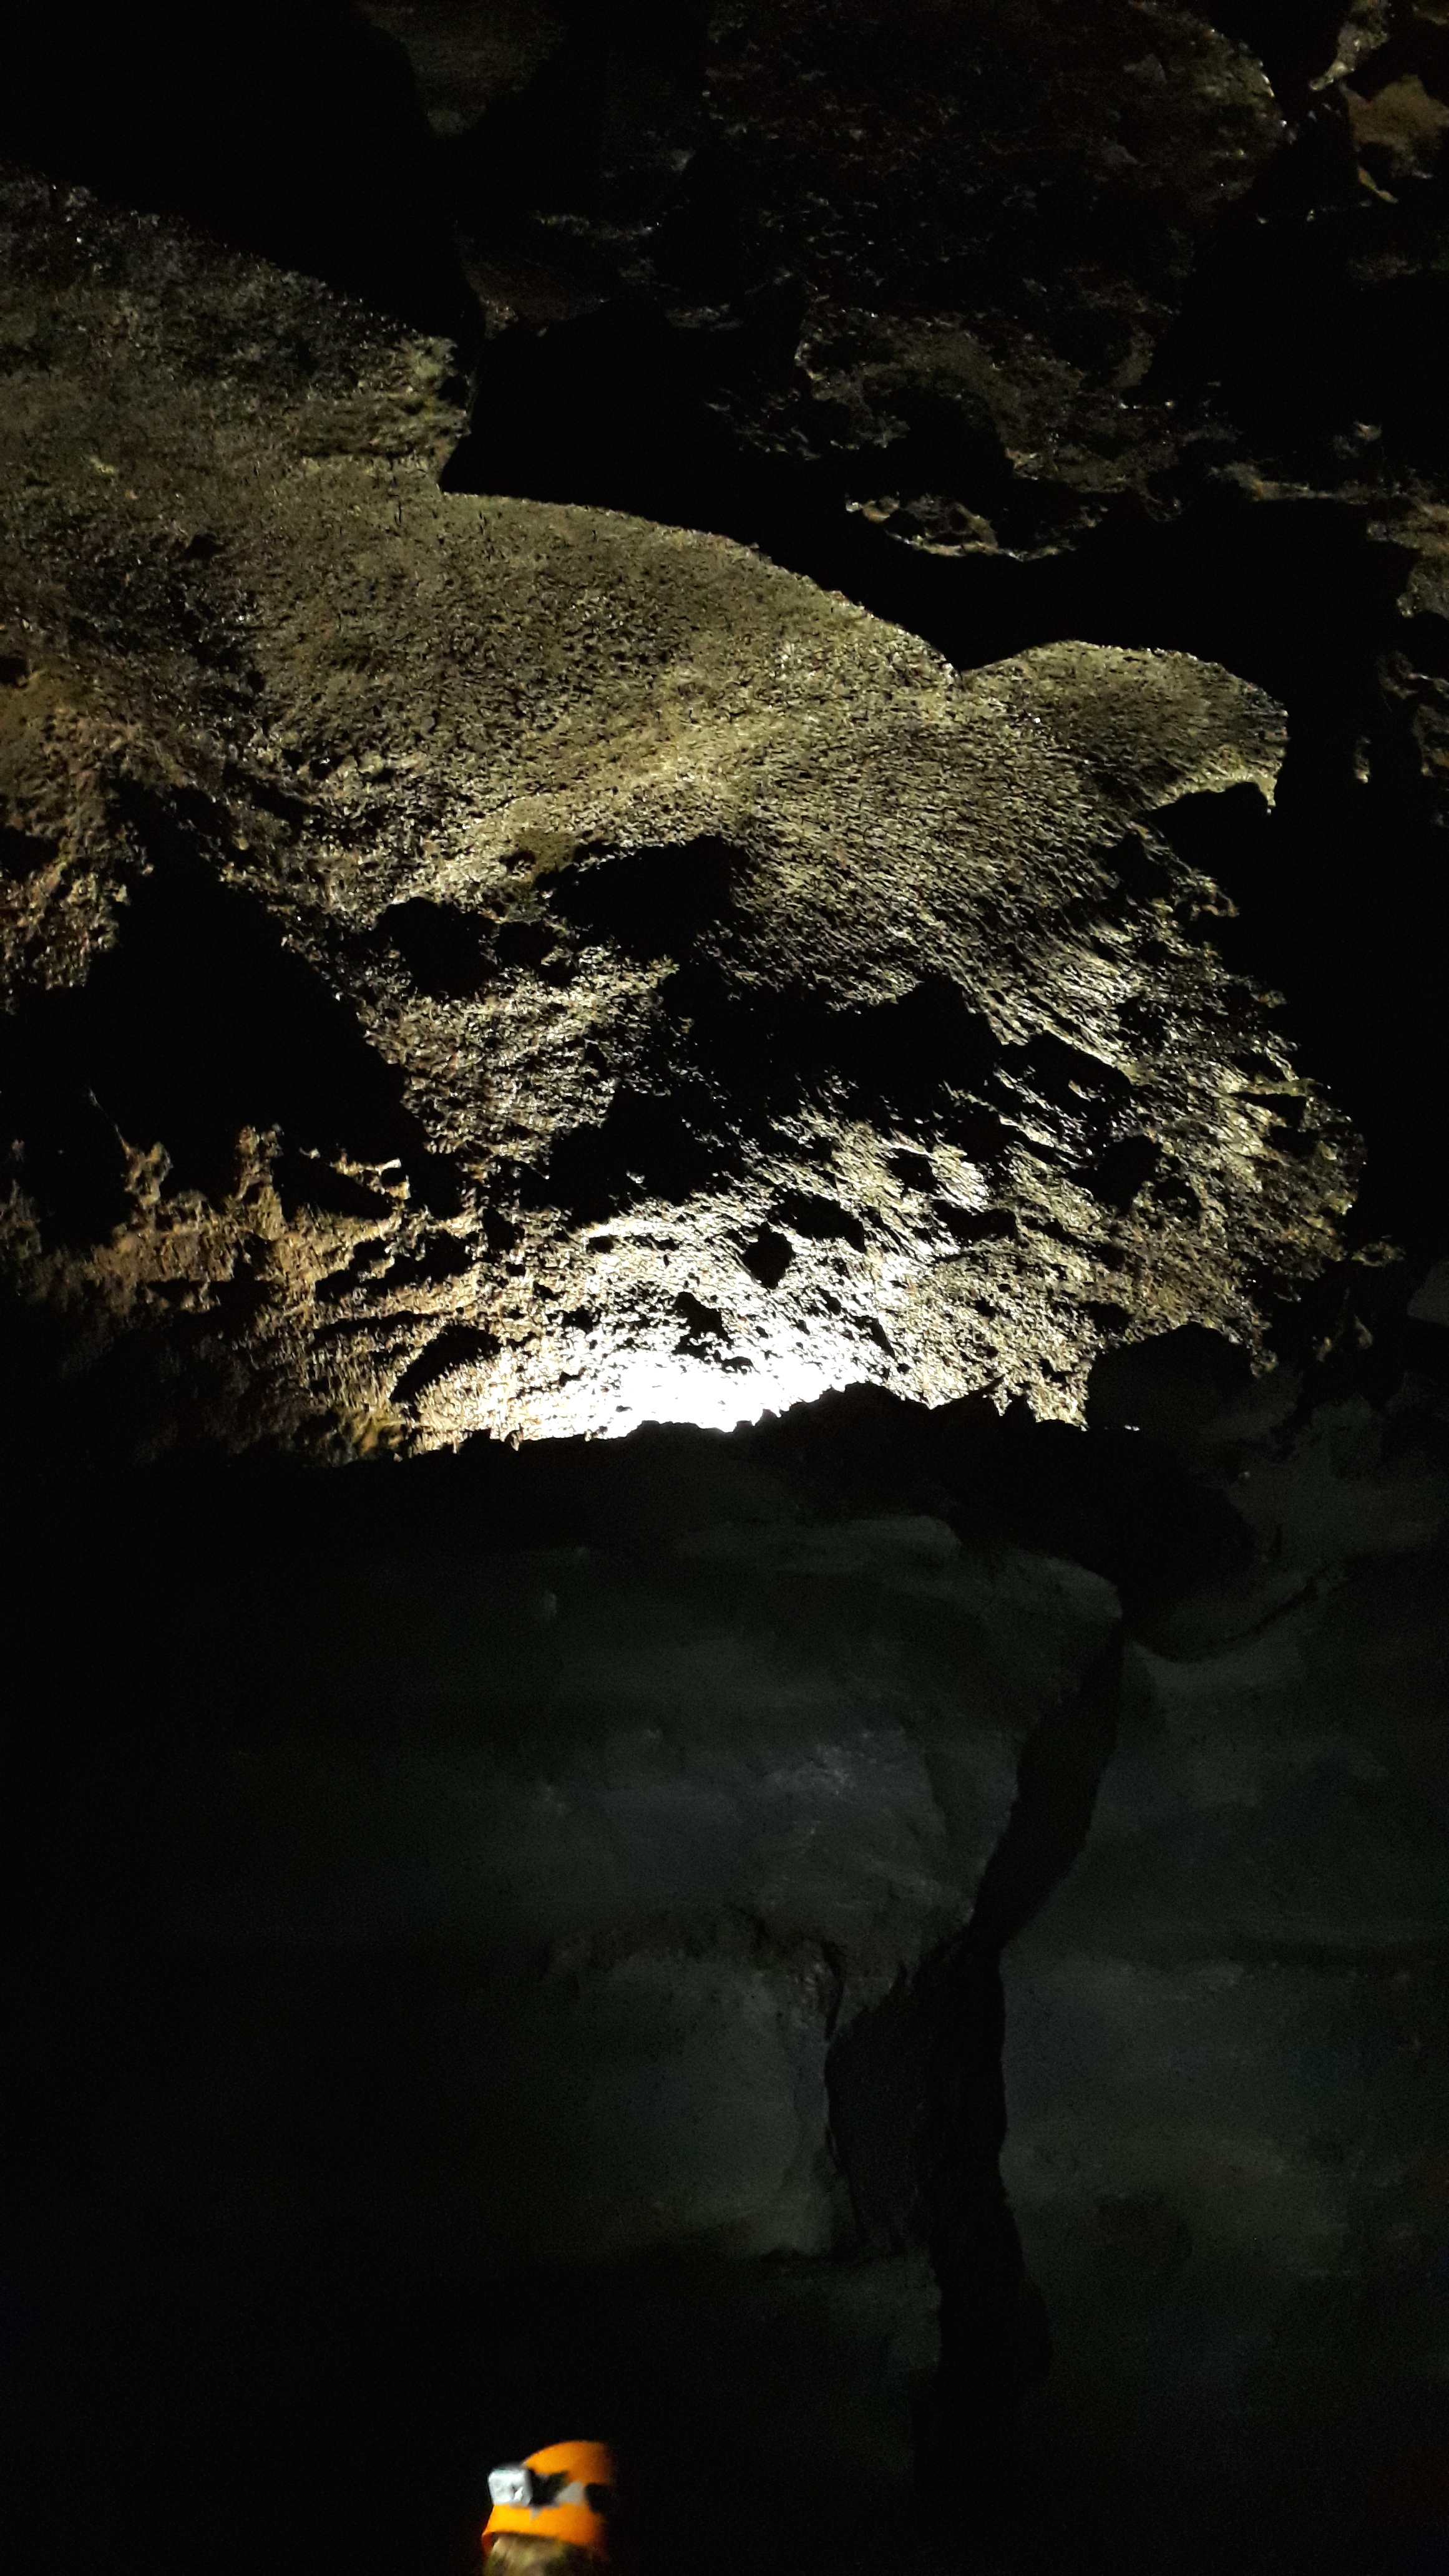 Víðgelmir lava tunnel. A Viking outlaw hid out on the ledge lit up here. They found the remains of his fire pit and bones of the stuff he'd eaten.